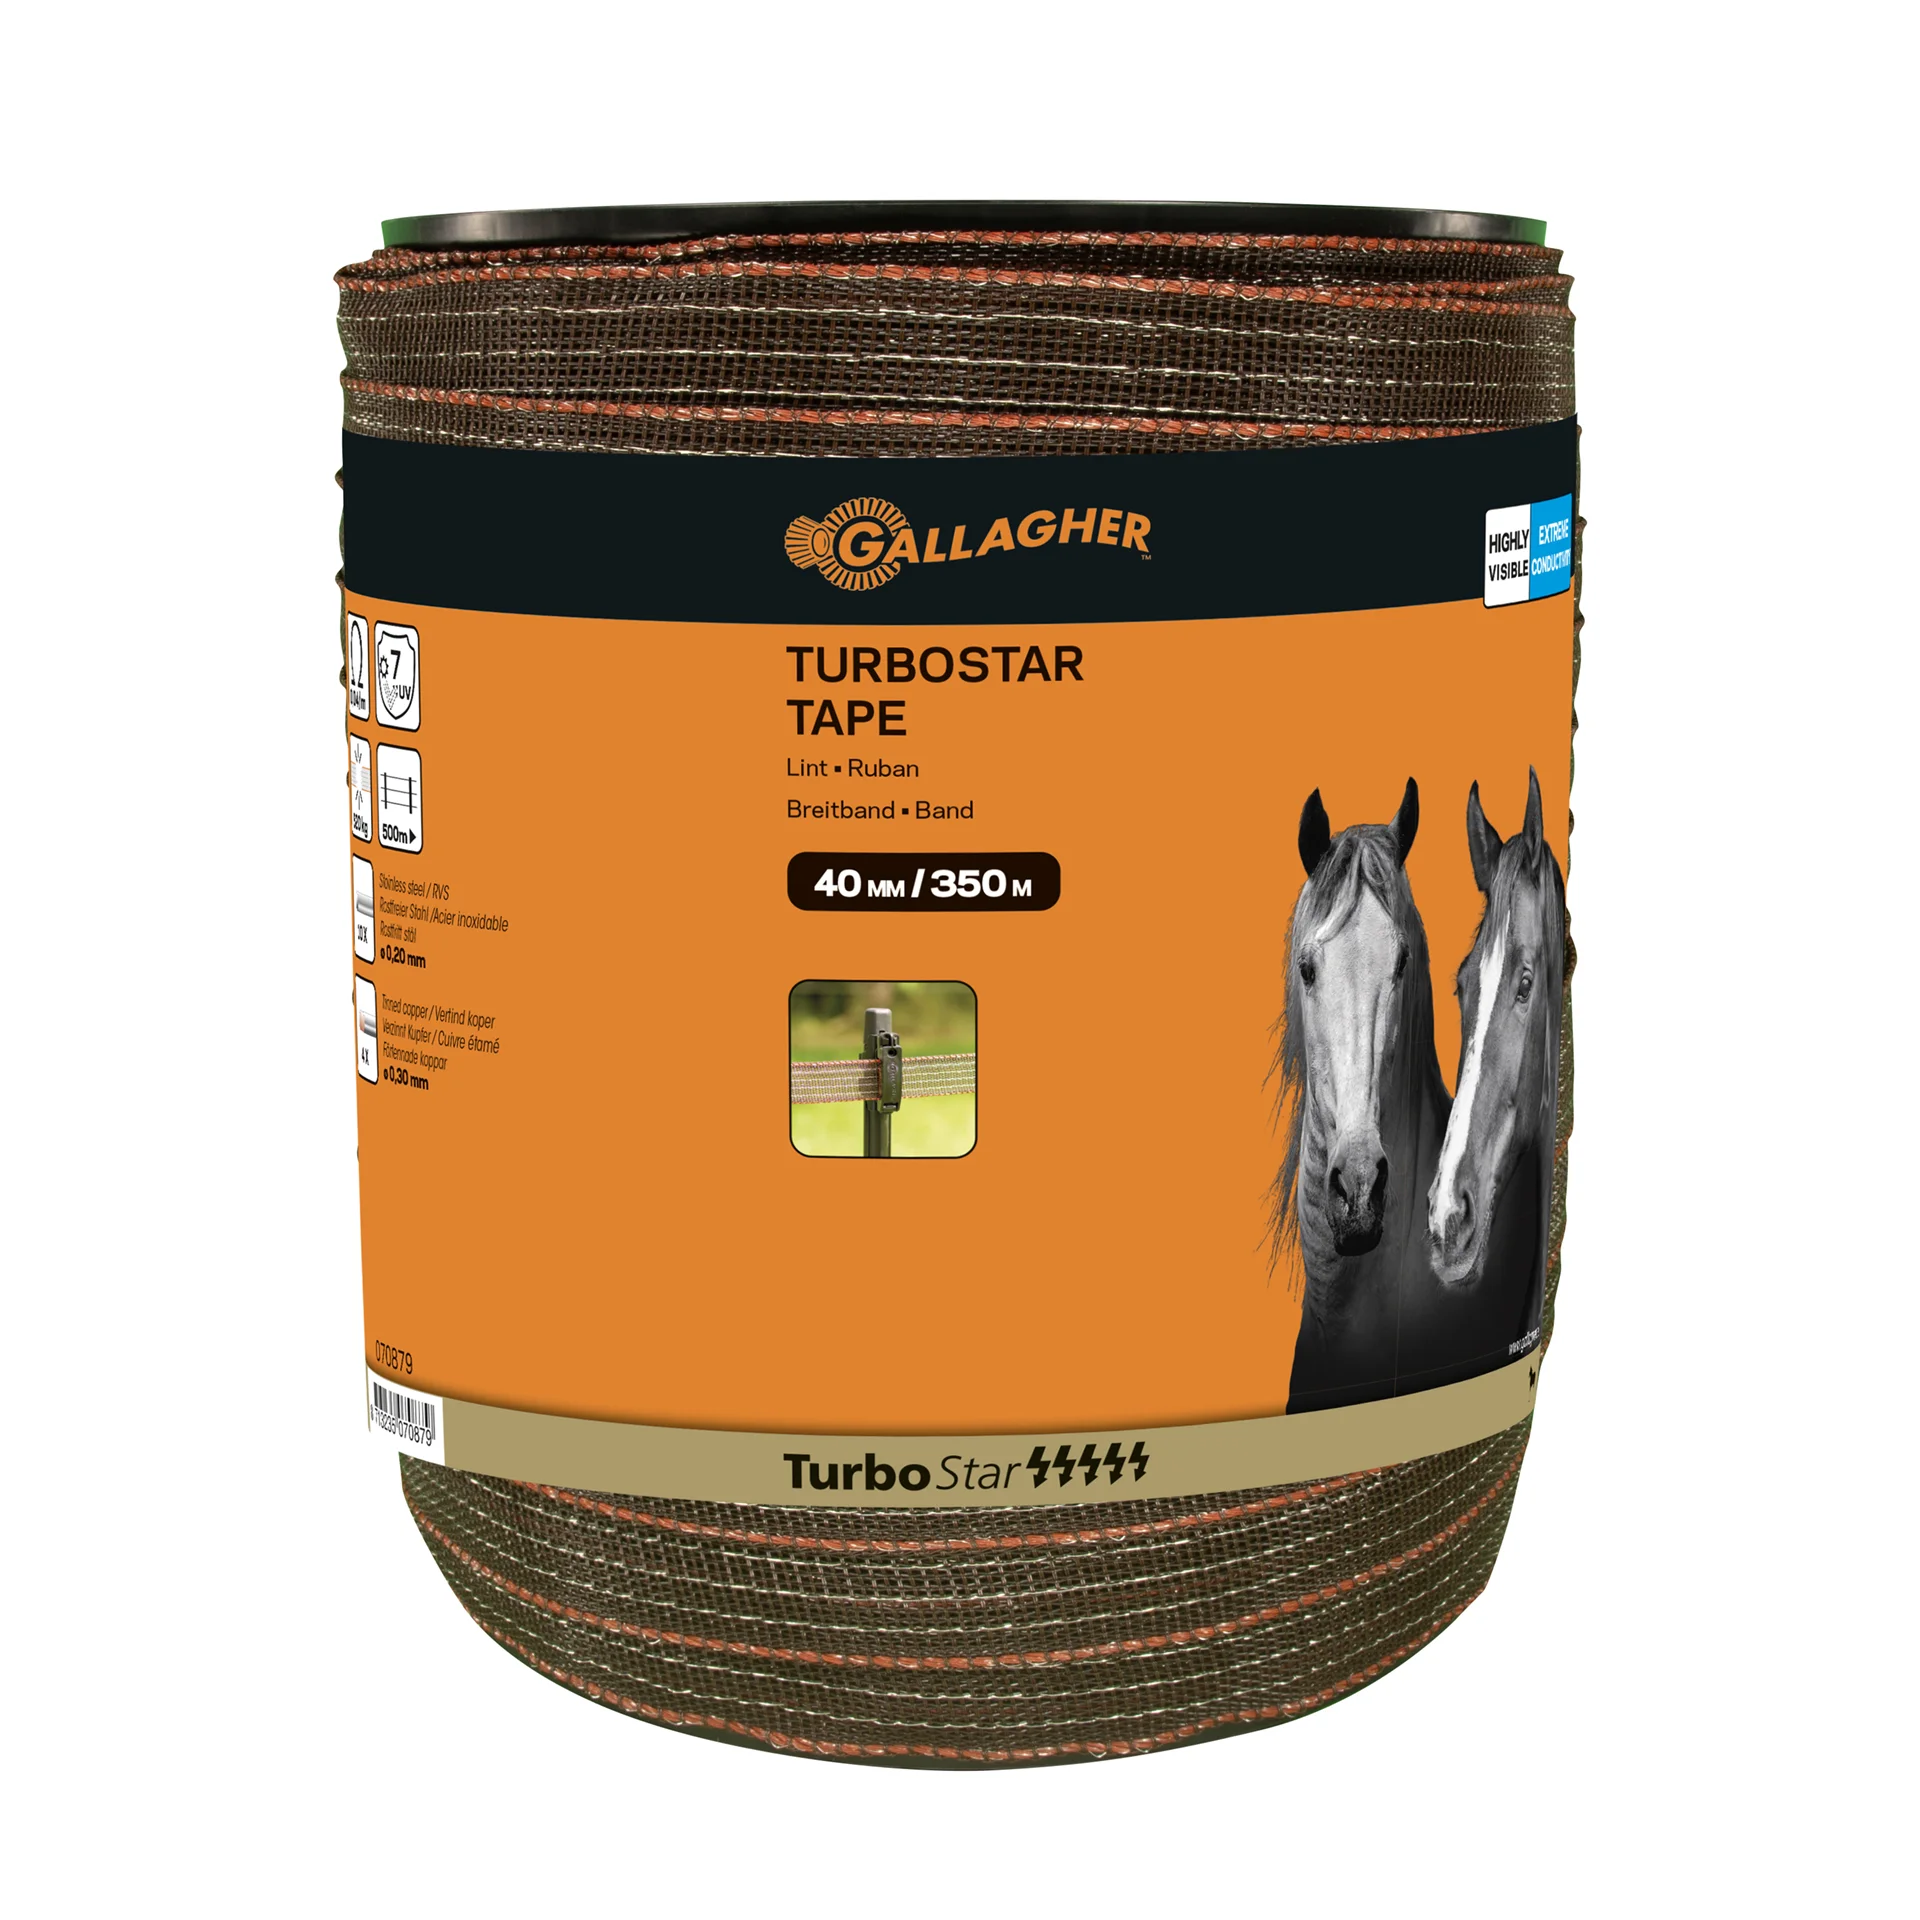 Gallagher electric fence tape TurboStar 40mm wide (350m) Terra